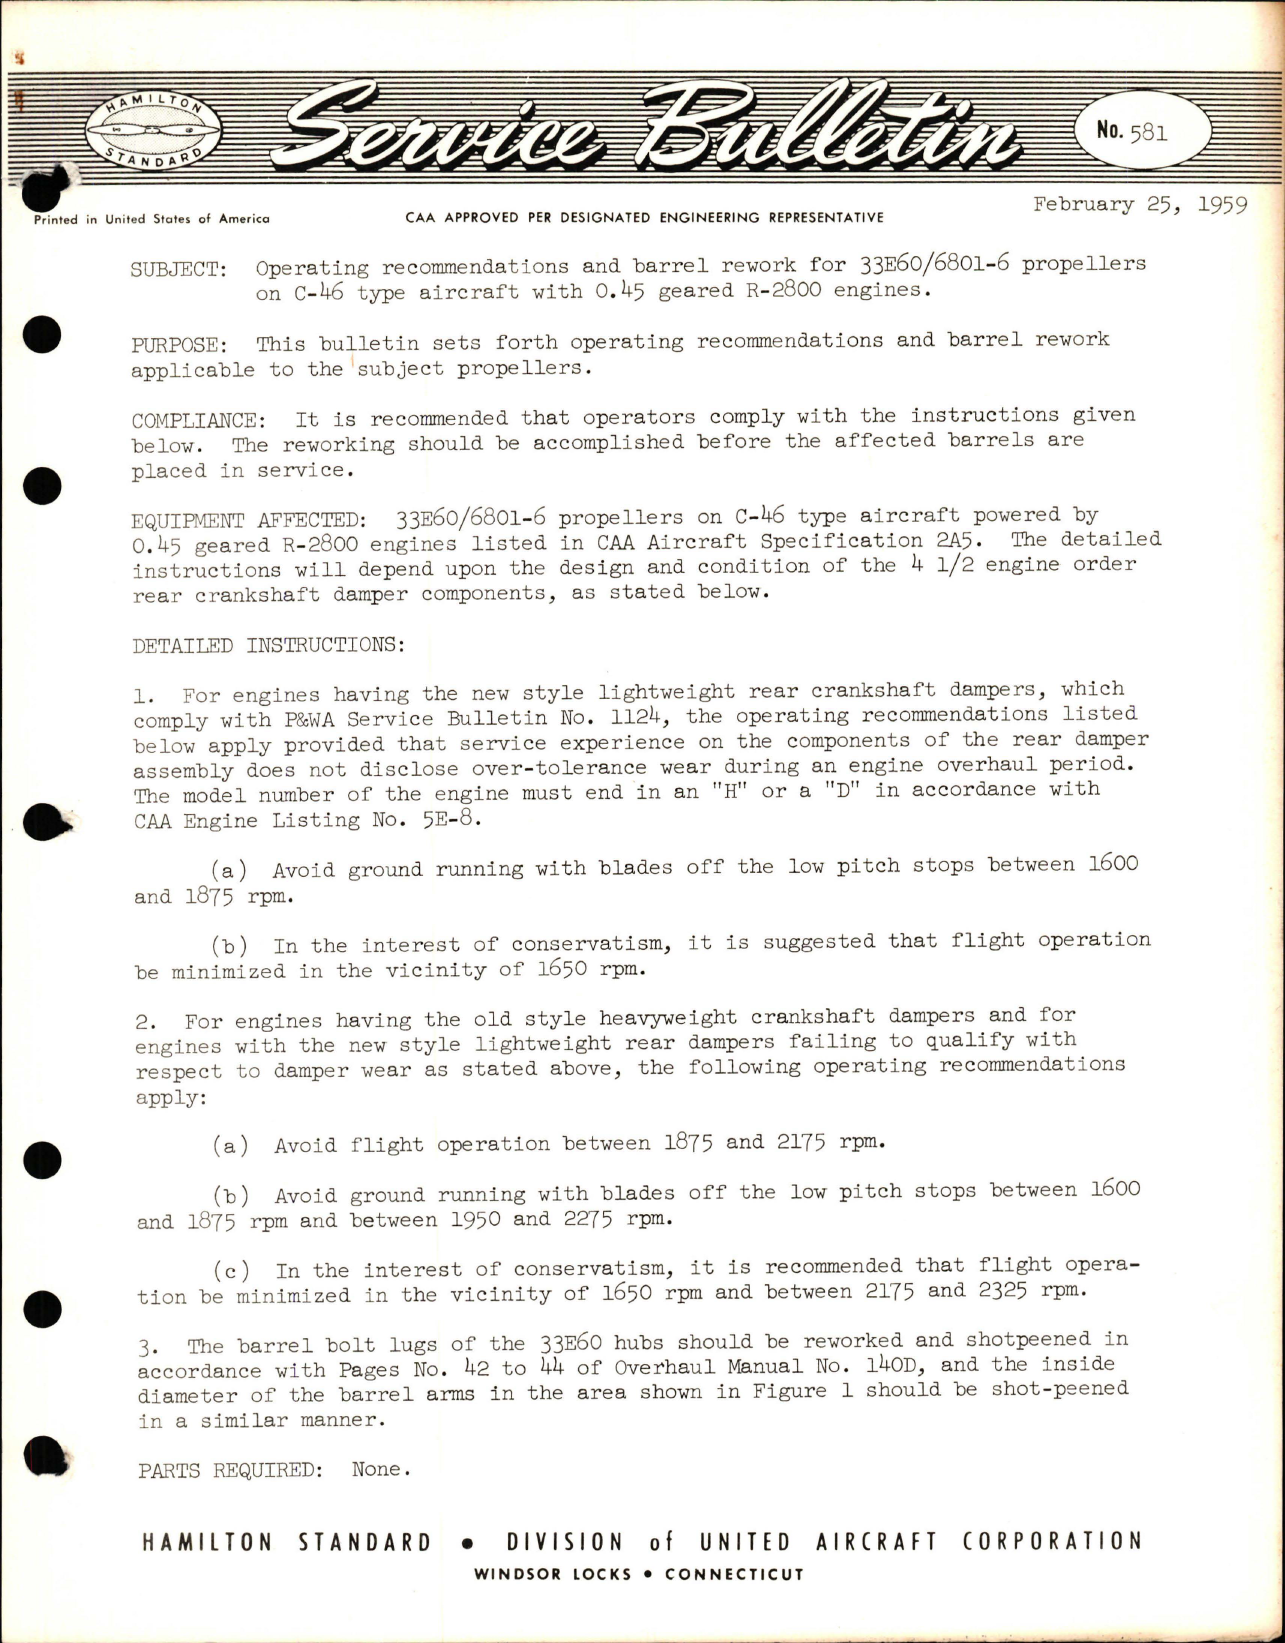 Sample page 1 from AirCorps Library document: Operating Recommendations & Barrel Rework for 33E60/6801-6 Propellers on C-46